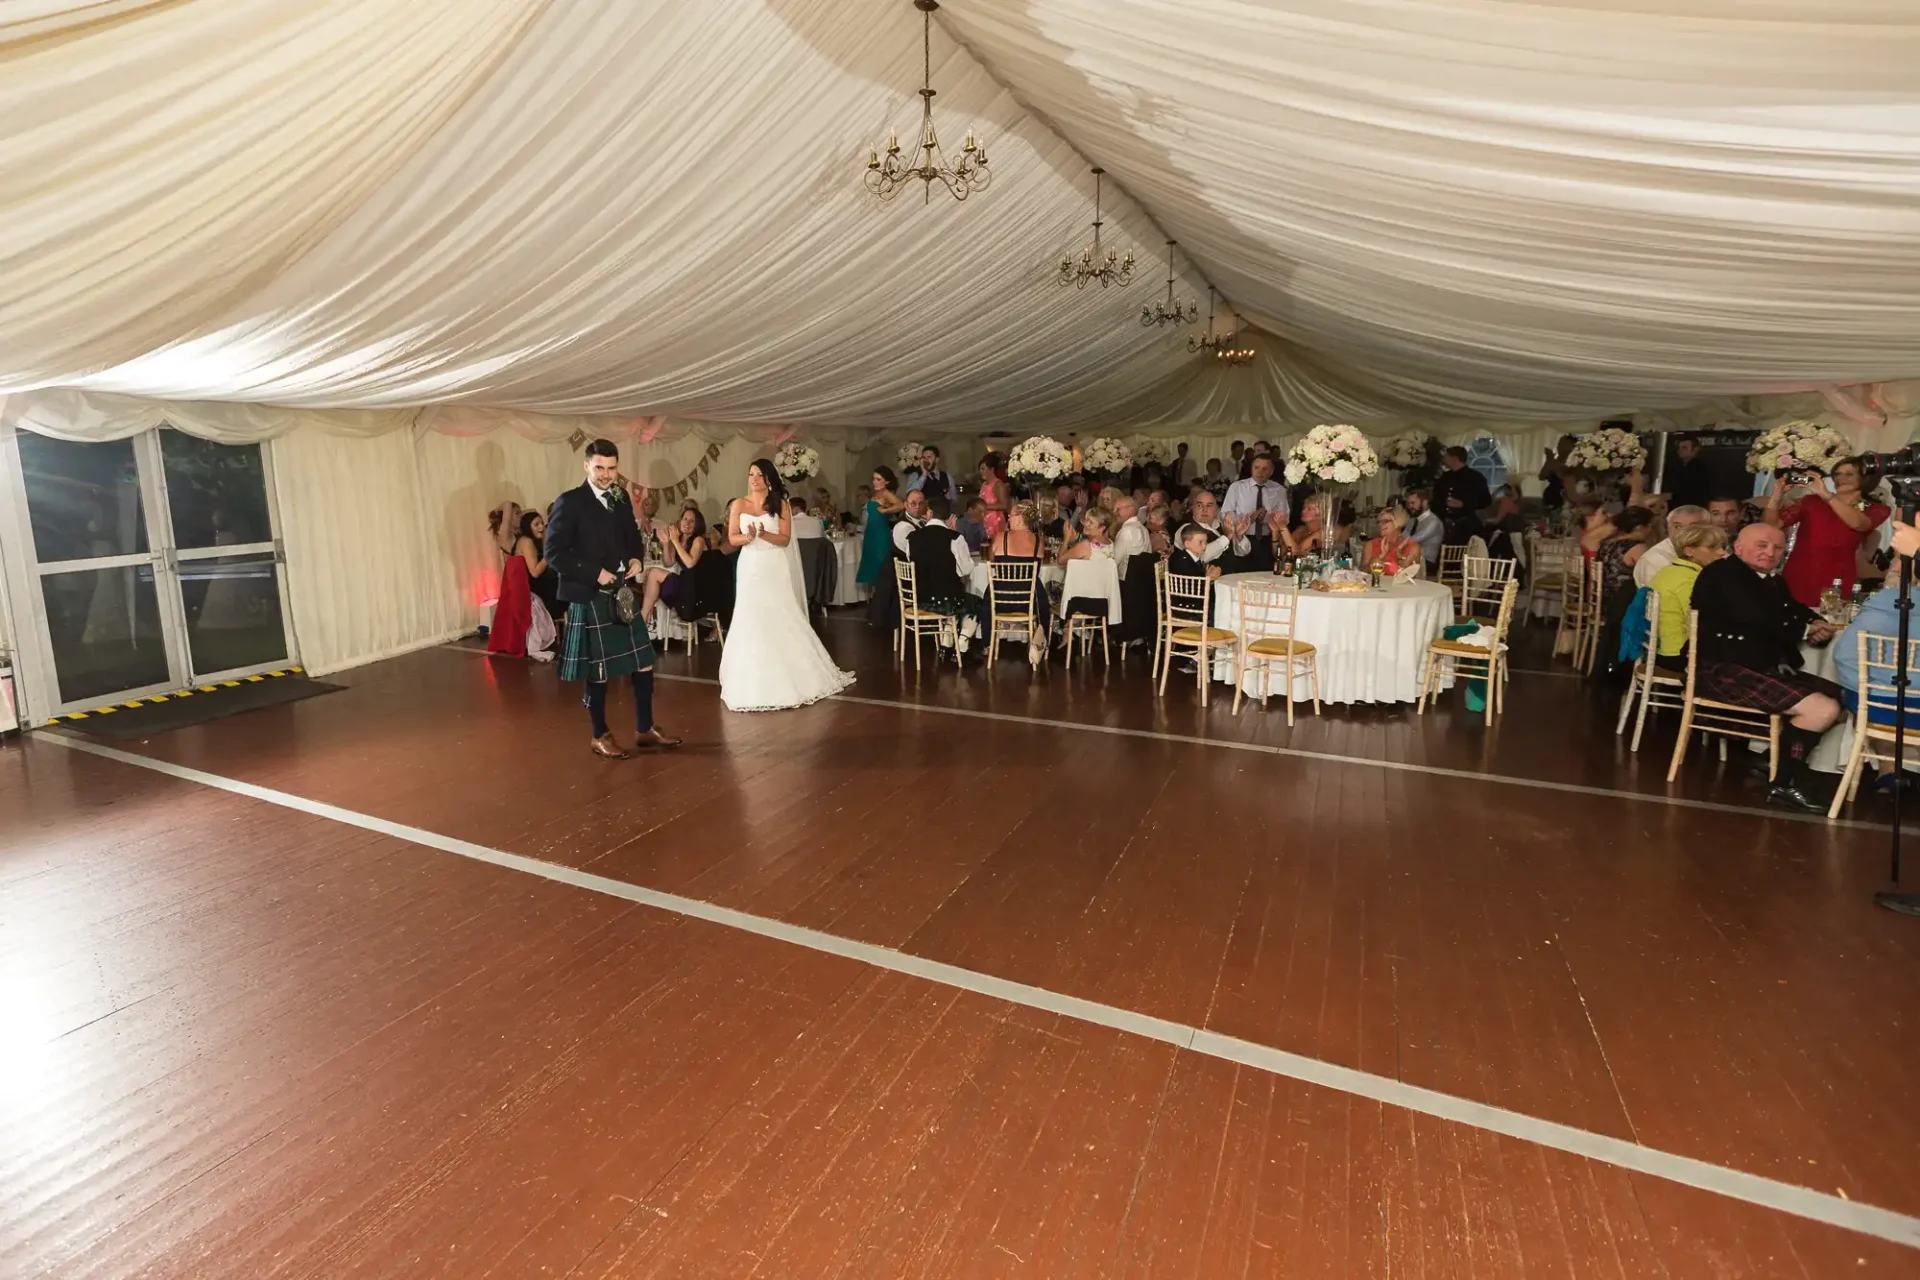 A bride and groom walking through a tent reception area with guests seated around, clapping and celebrating.